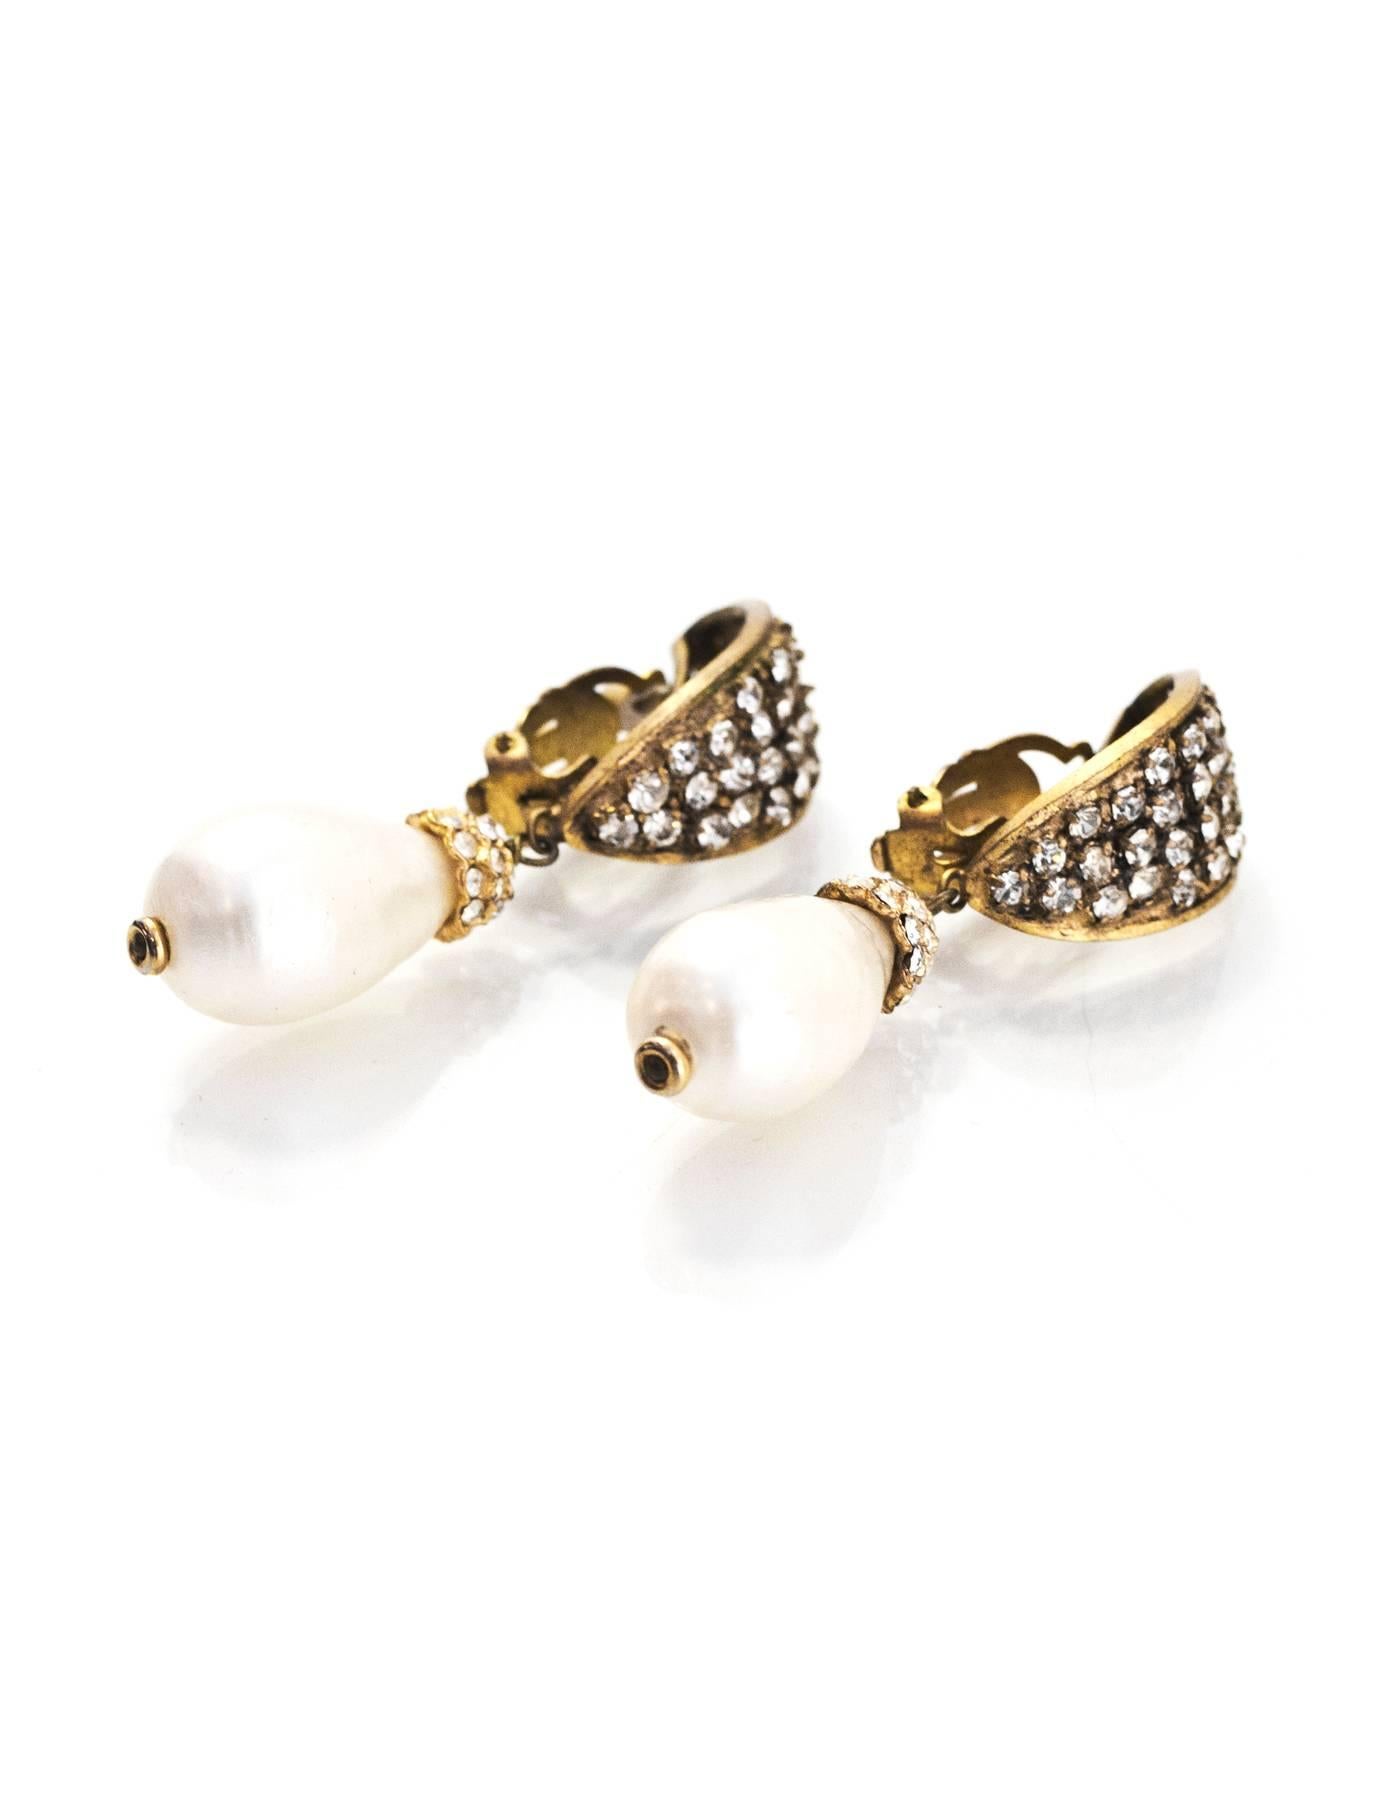 Chanel Vintage Crystal and Pearl Drop Clip-On Earrings

Made In: France
Color: Gold, ivory
Materials: Metal, faux pearl, crystal
Closure: Clip on
Stamp: Chanel CC Made In France
Overall Condition: Excellent pre-owned vintage condition with the